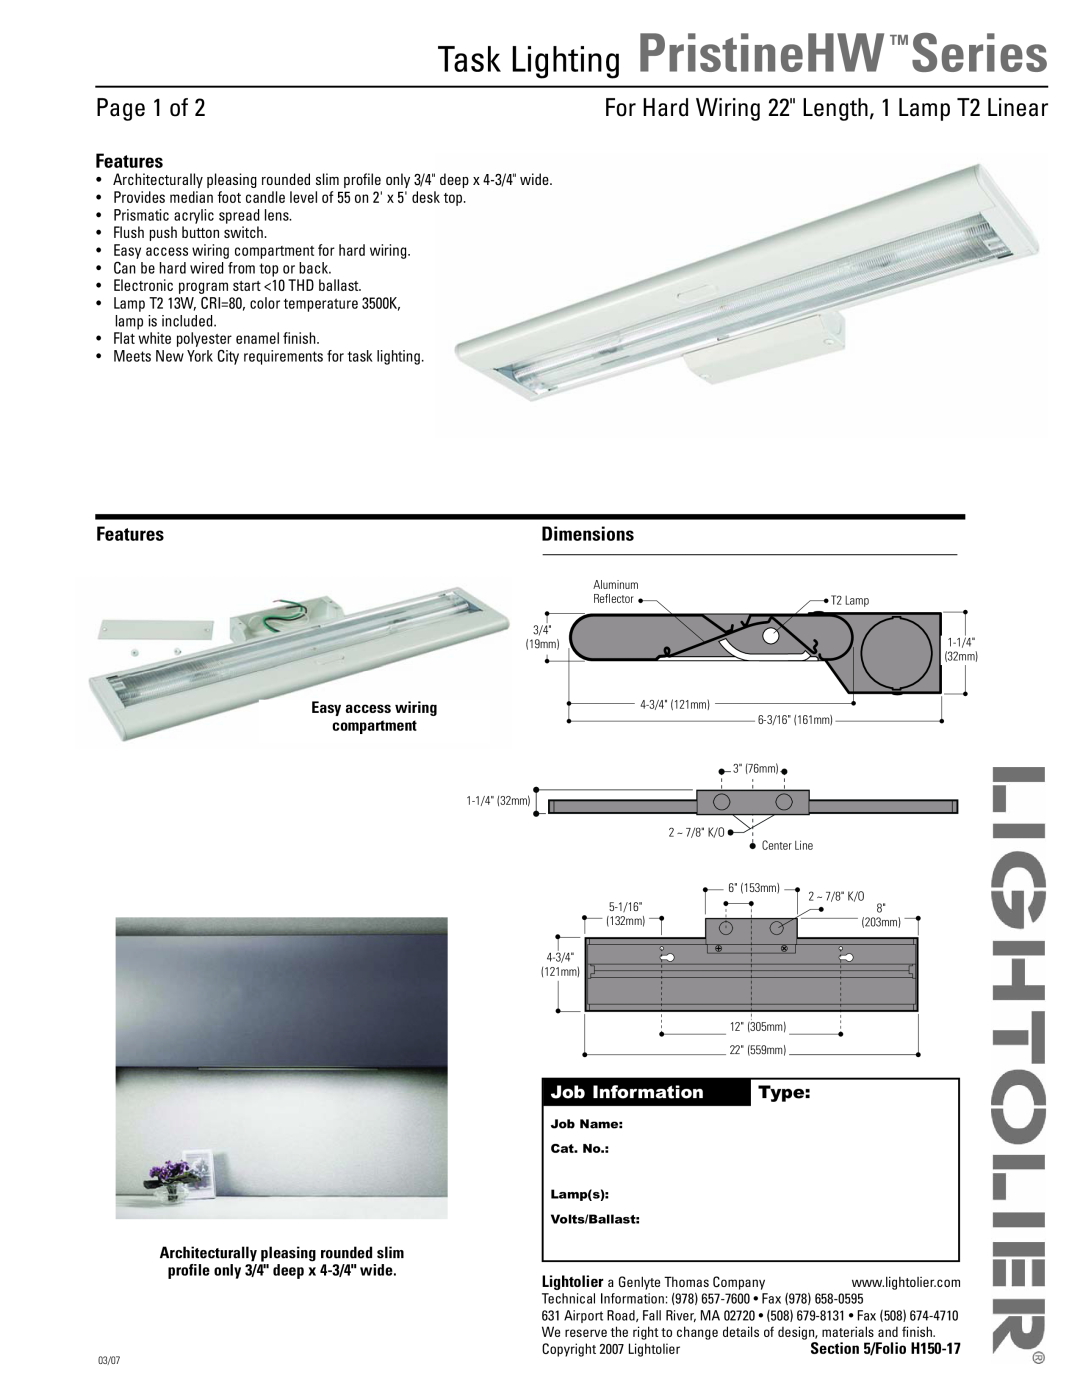 Lightolier PristineHW Series dimensions Page 1 of, For Hard Wiring 22 Length, 1 Lamp T2 Linear, Features, Dimensions, Type 